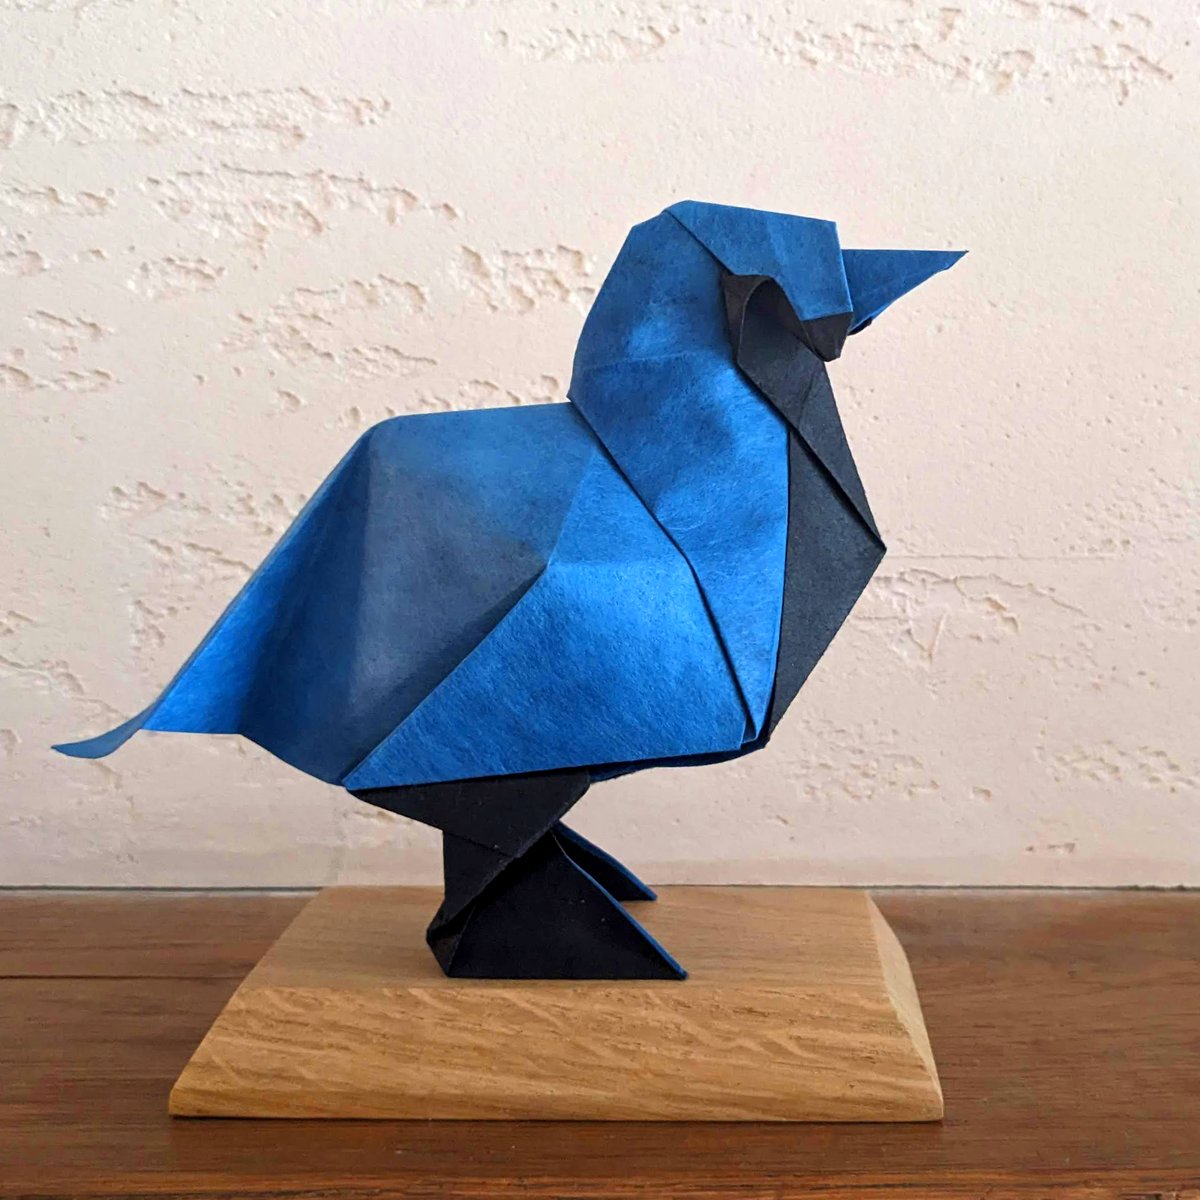 Little Blue Bird
Designed and folded by me
Folded from a single 30x30 cm sheet of Blue Shadow Thai paper.
#Origami #nicolasterryorigami #origamishop 
#shadowthai